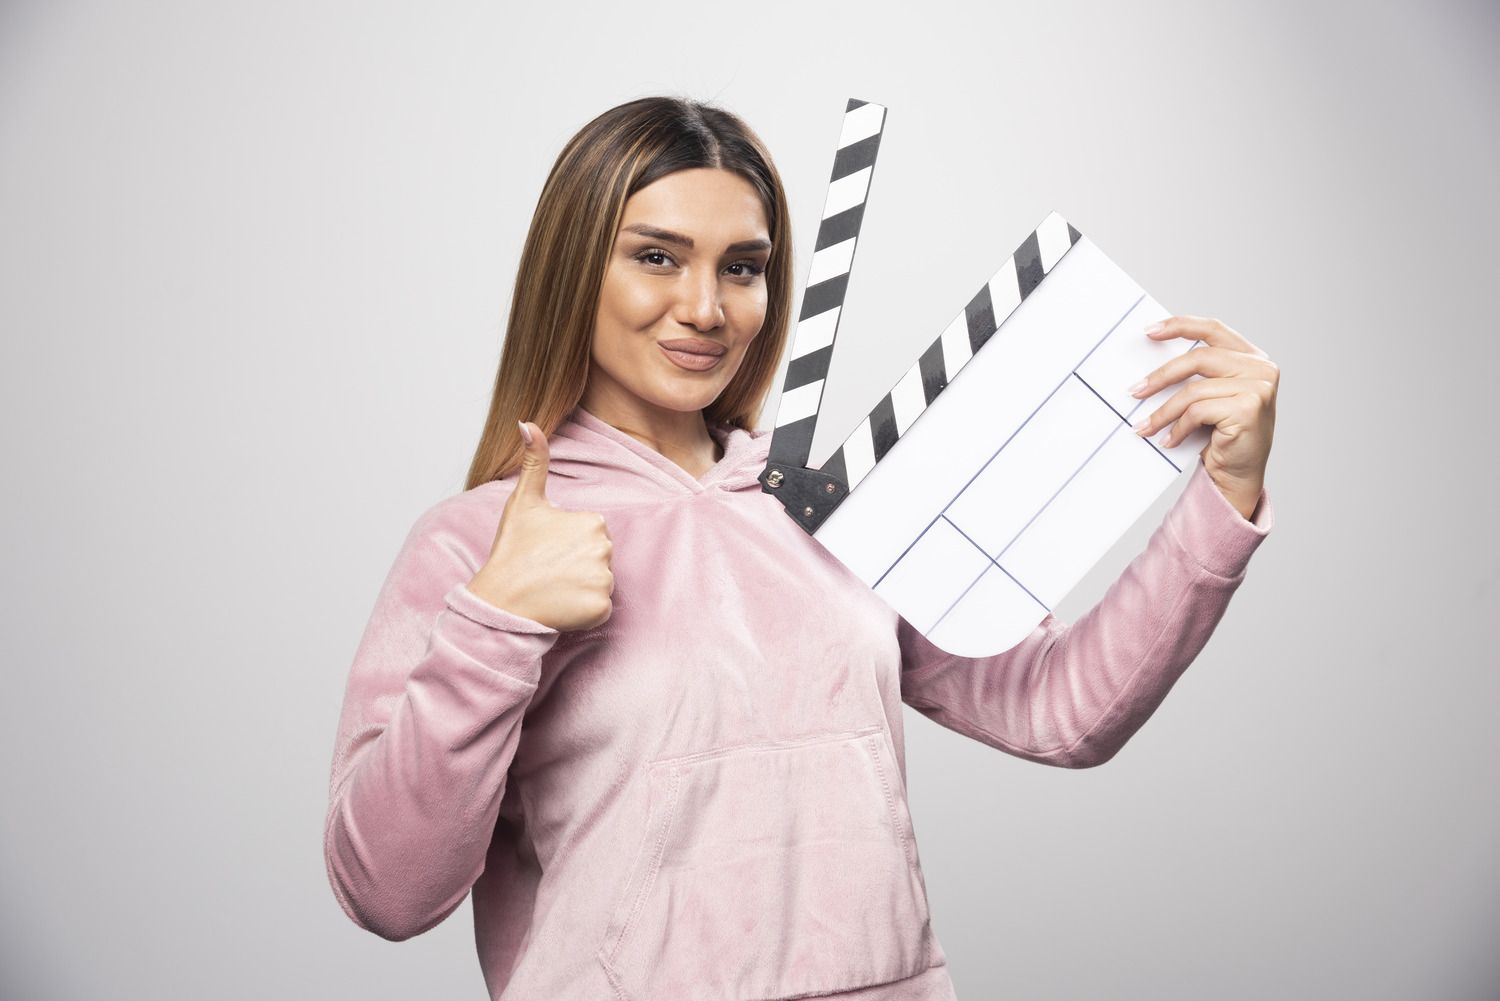 blond-lady-pink-sweatshirt-holding-blank-clapper-board-gives-professional-poses (1).jpg